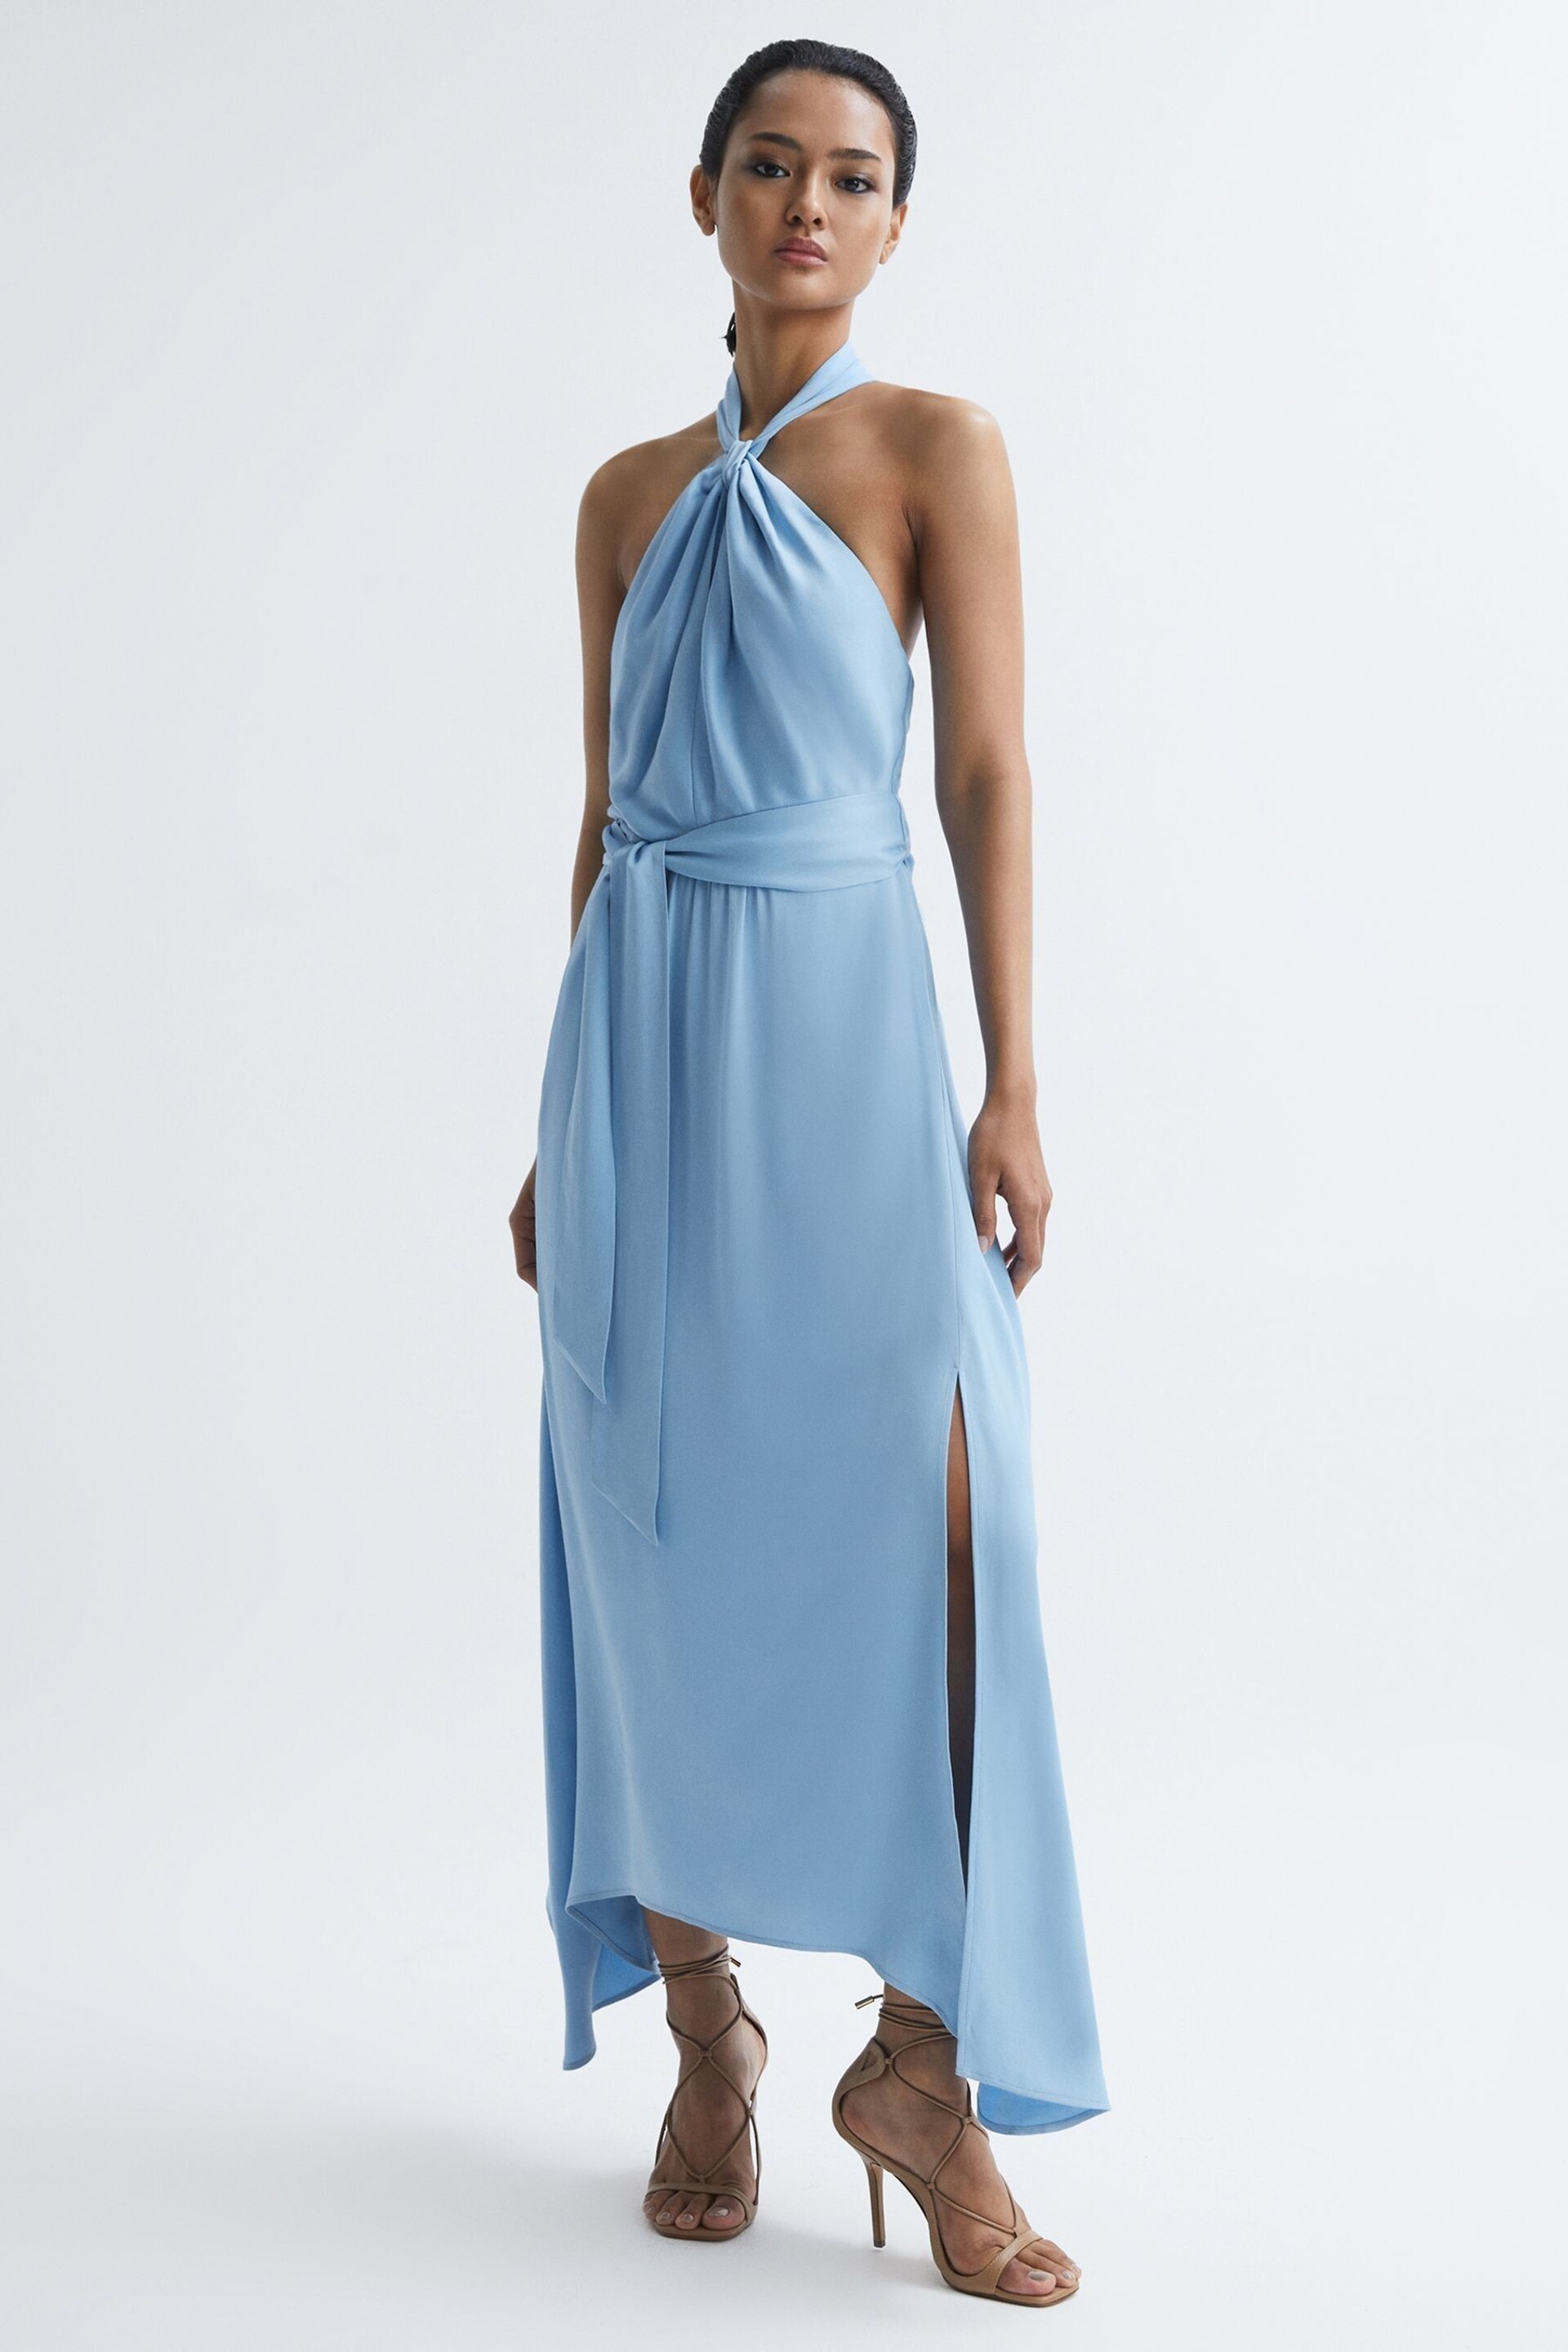 Reiss Blue Evelyn Fitted Halter Neck Midi Dress - Image 1 of 7